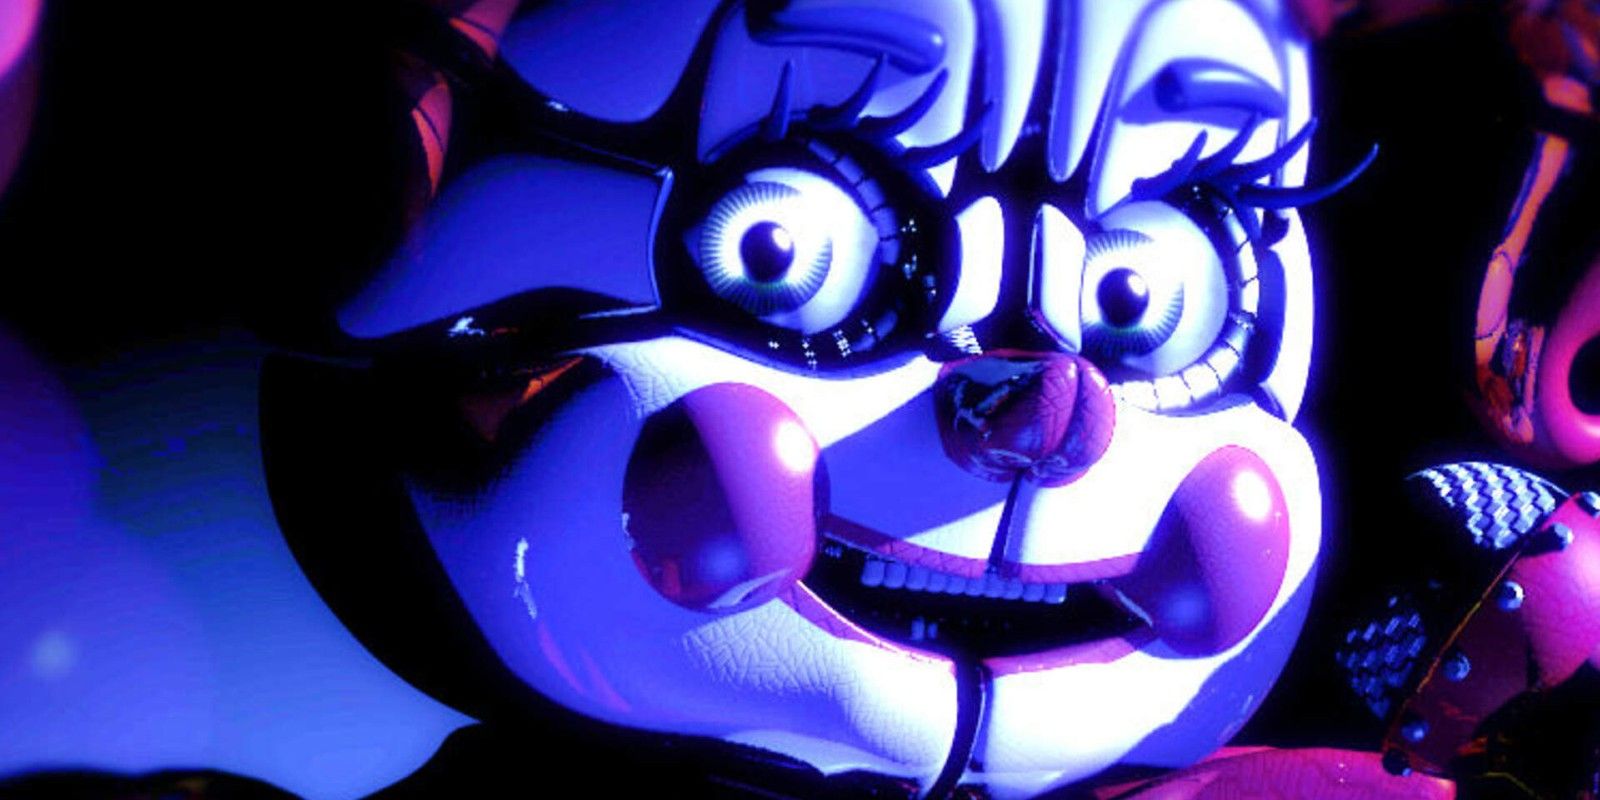 Circus Baby as seen in art for Five Nights at Freddy's: Sister Location.